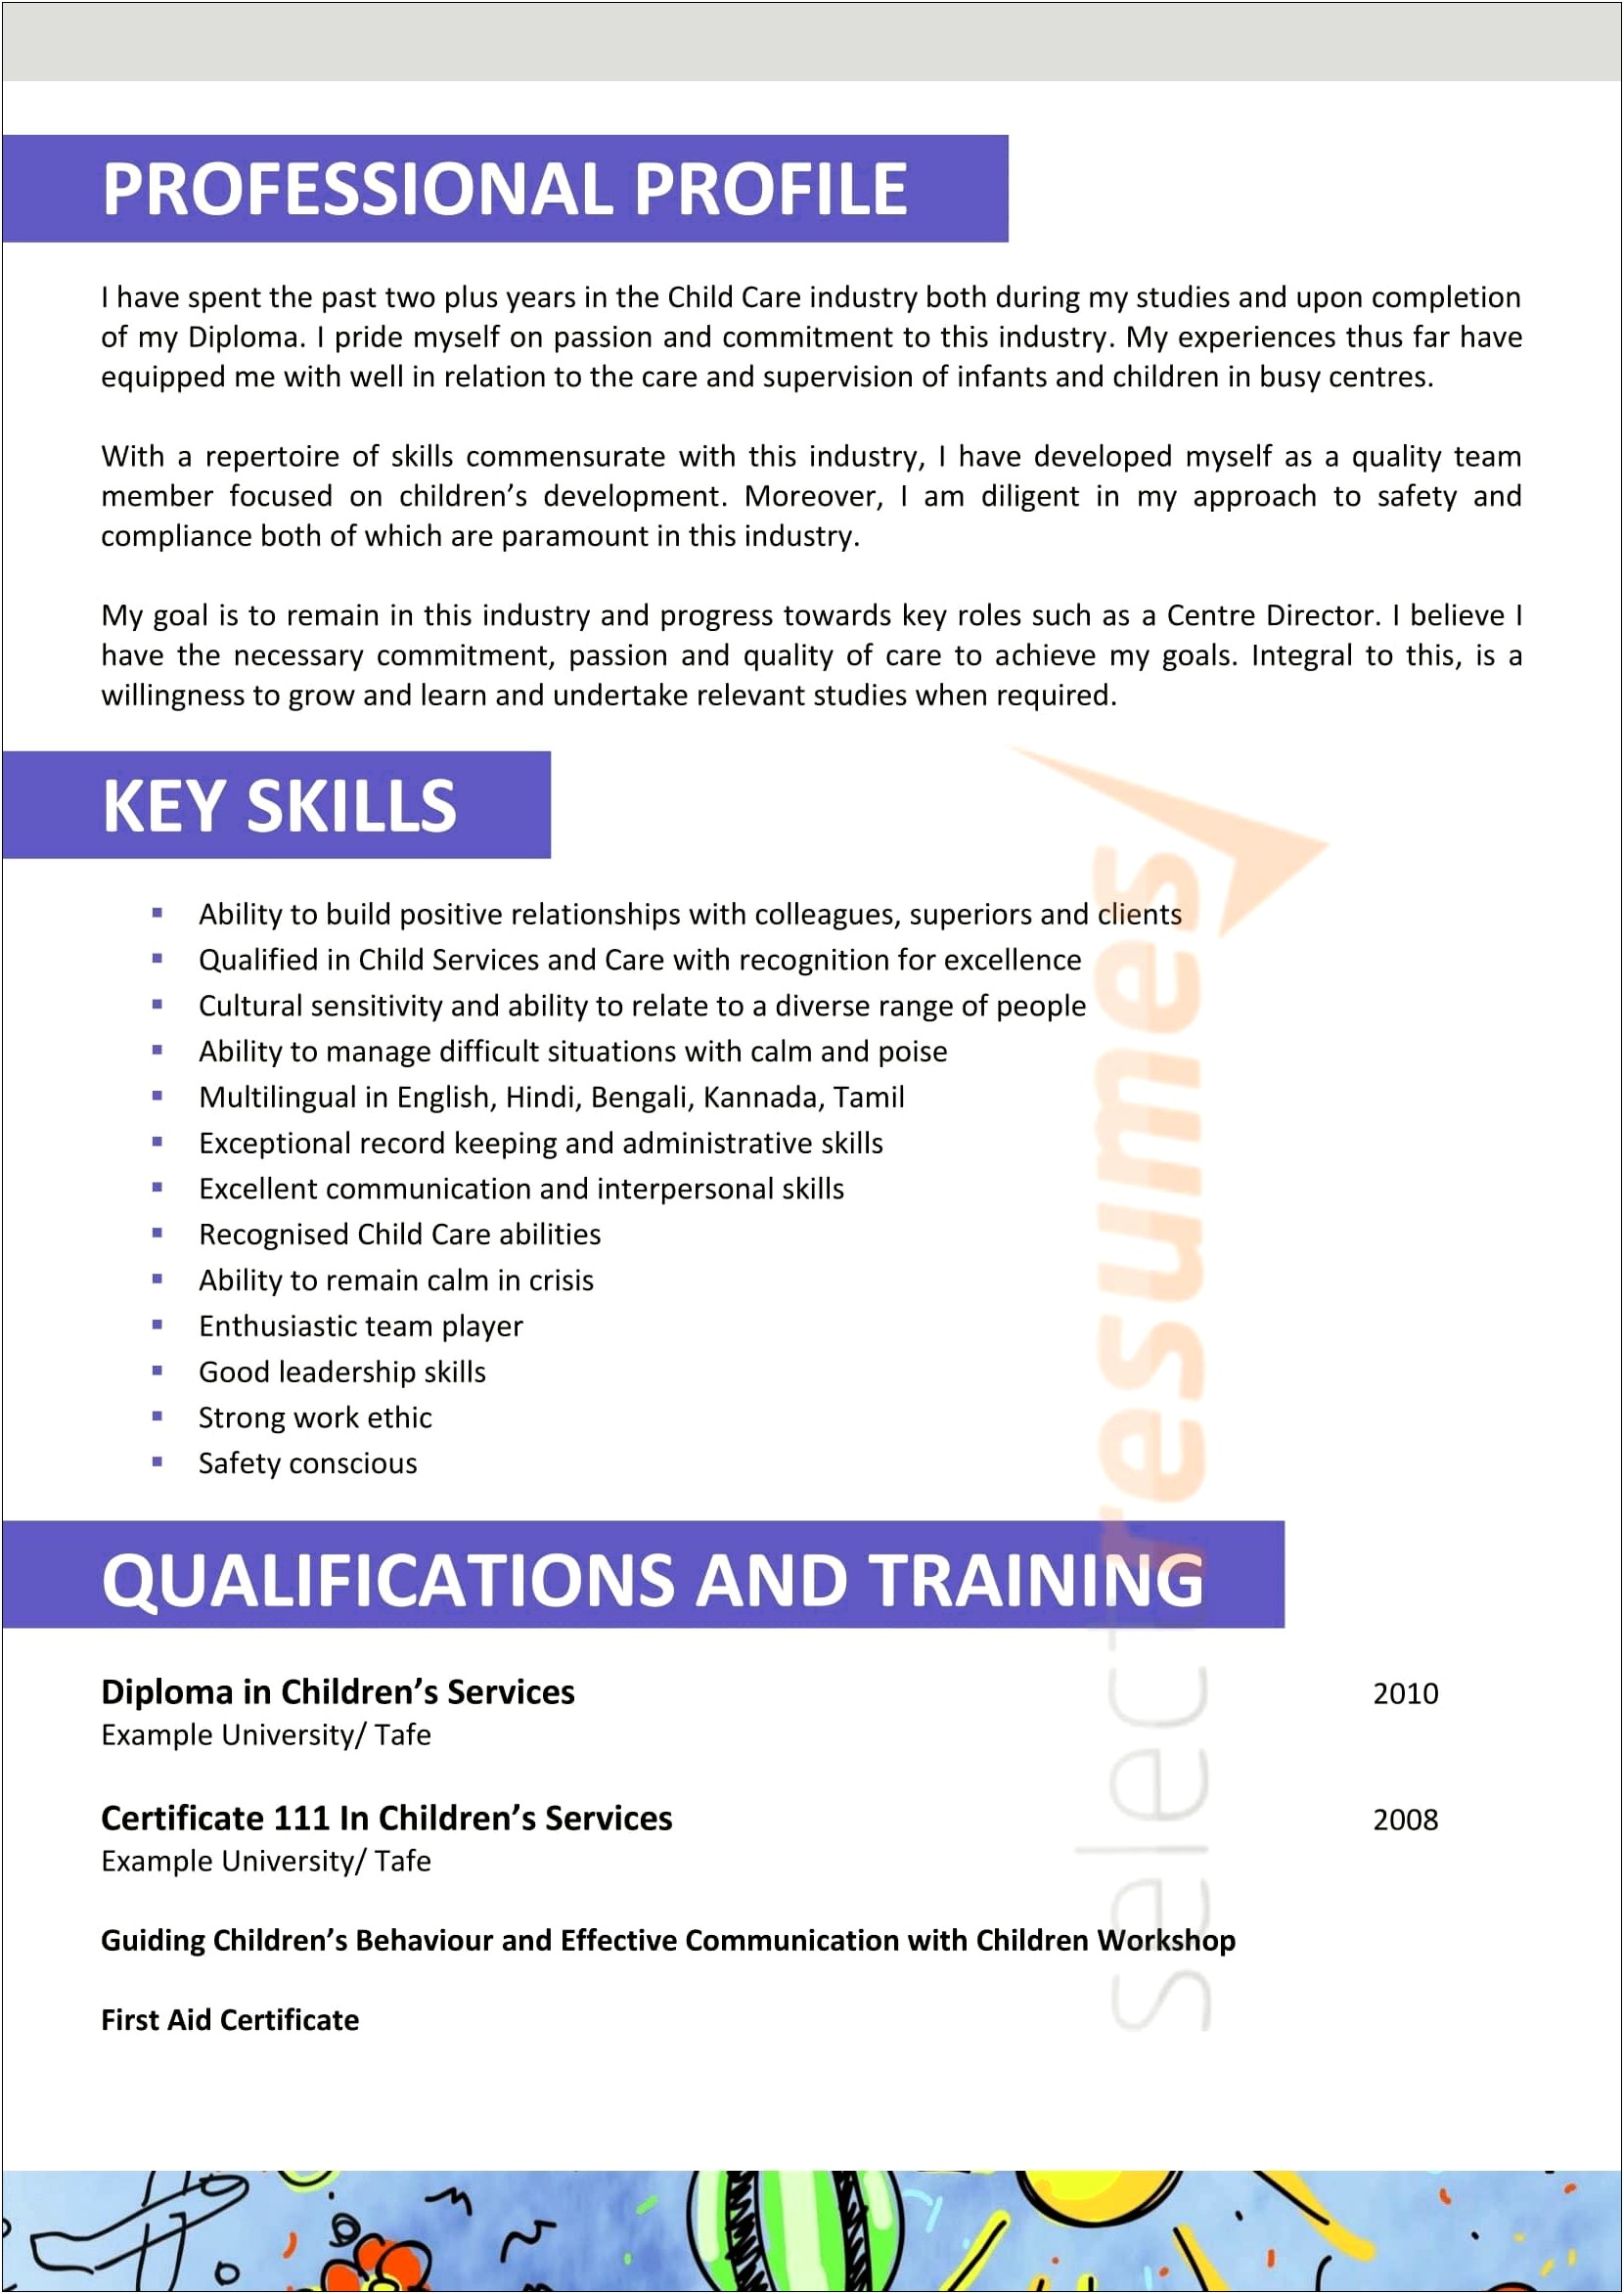 Child Care Skills And Qualifications Resume